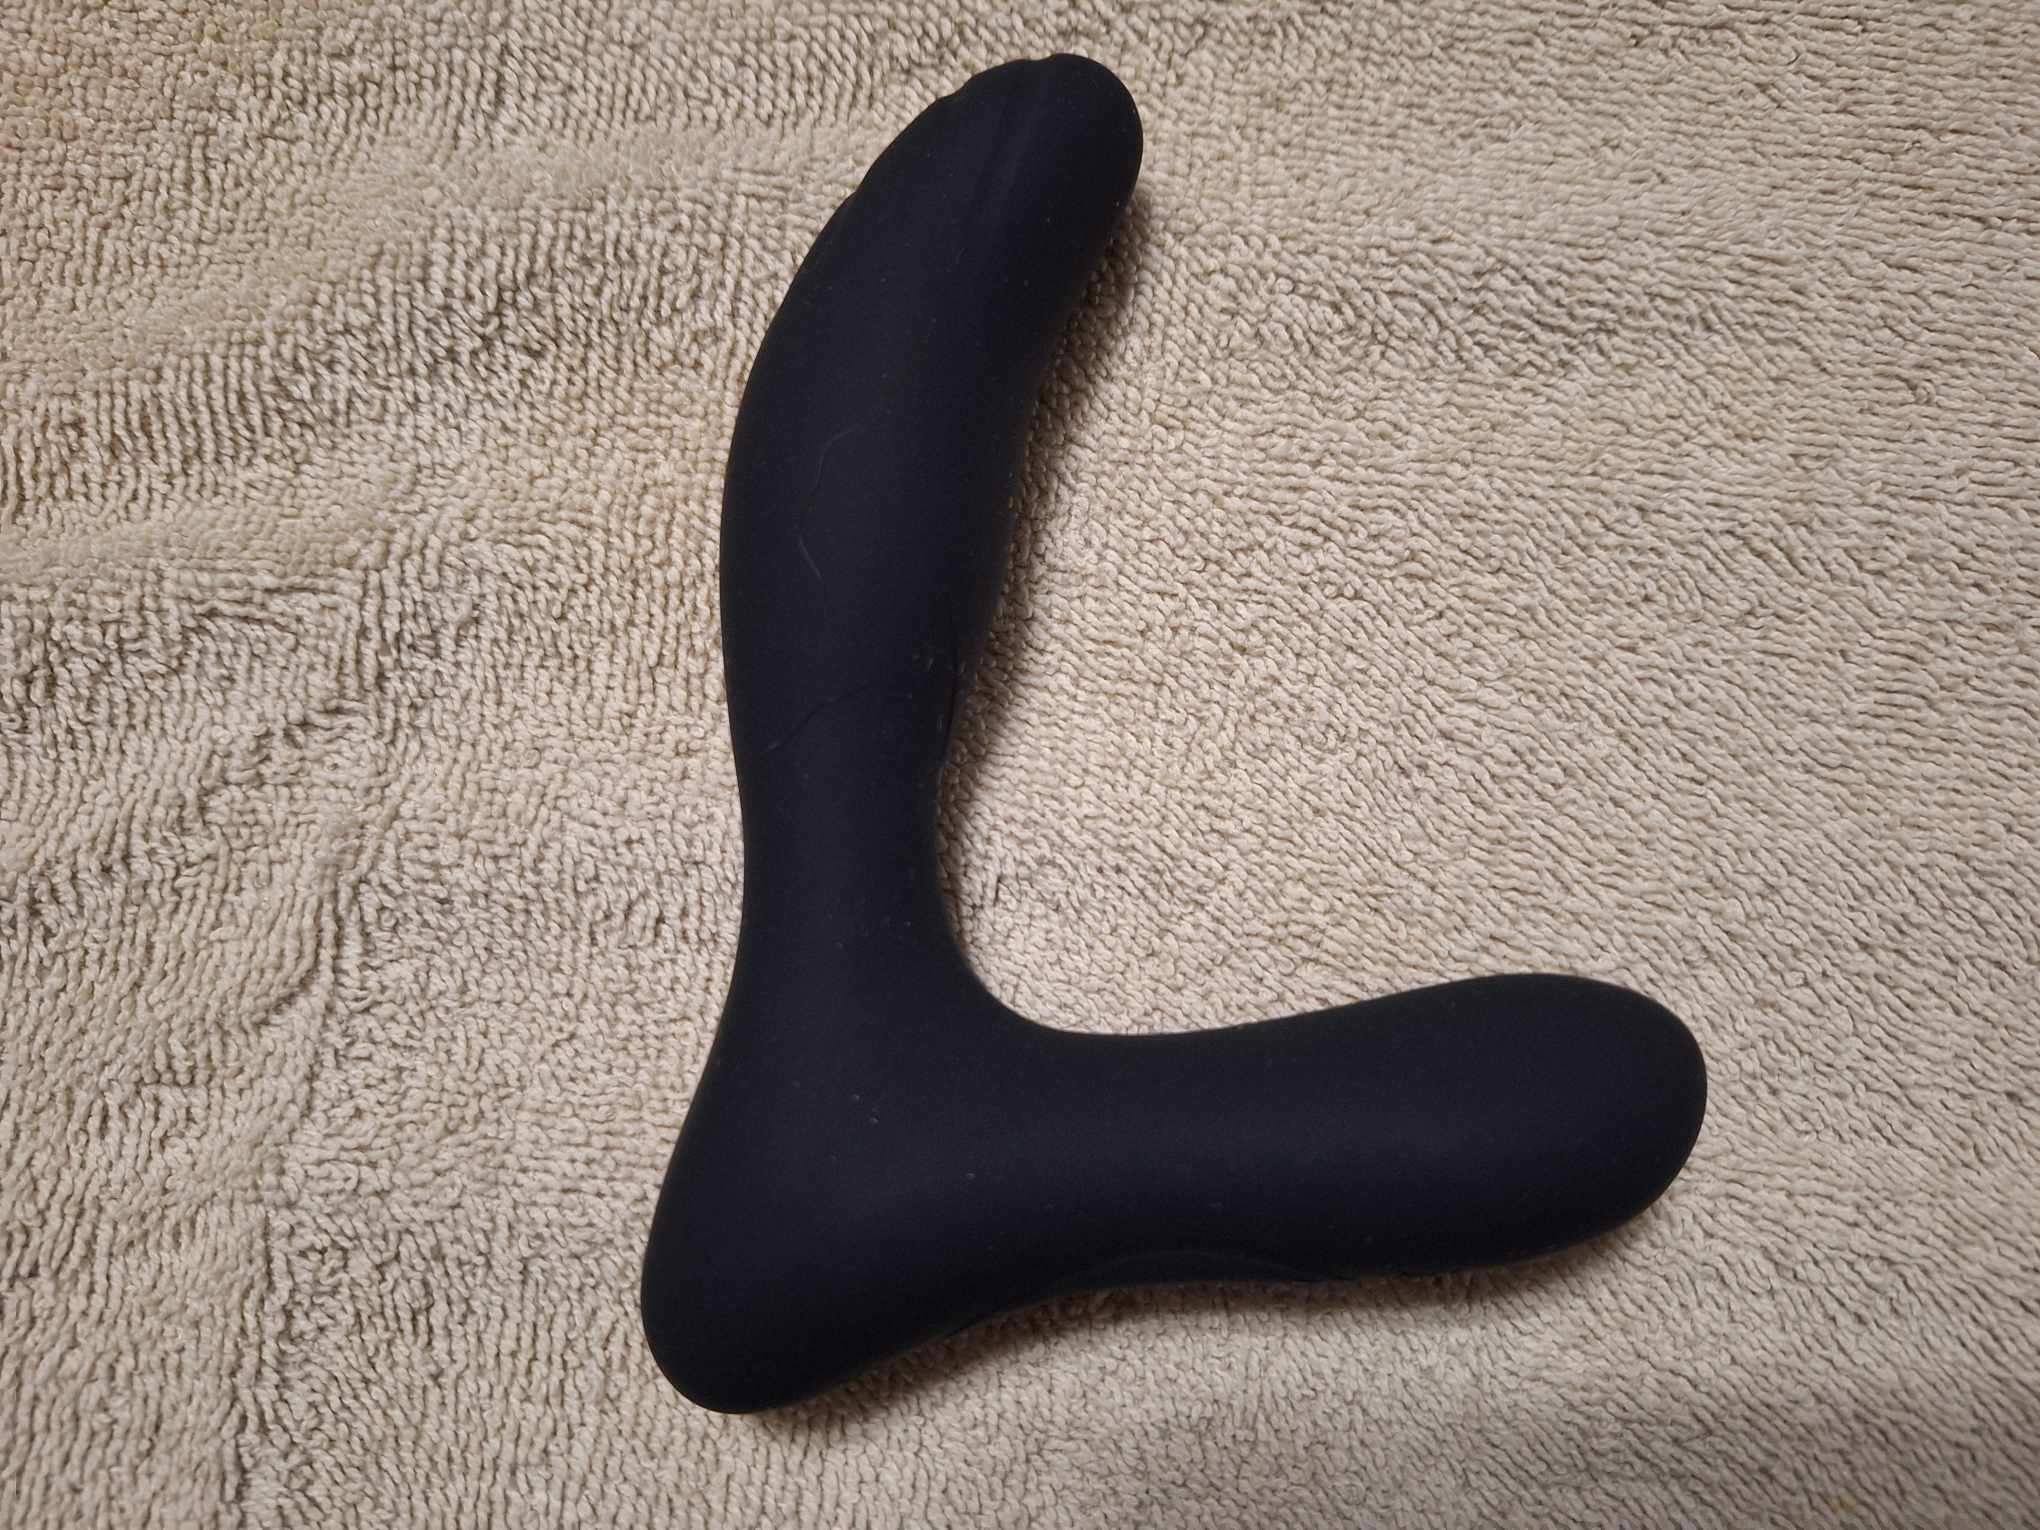 Anos RC Prostate Butt Plug What I like/dislike about the design